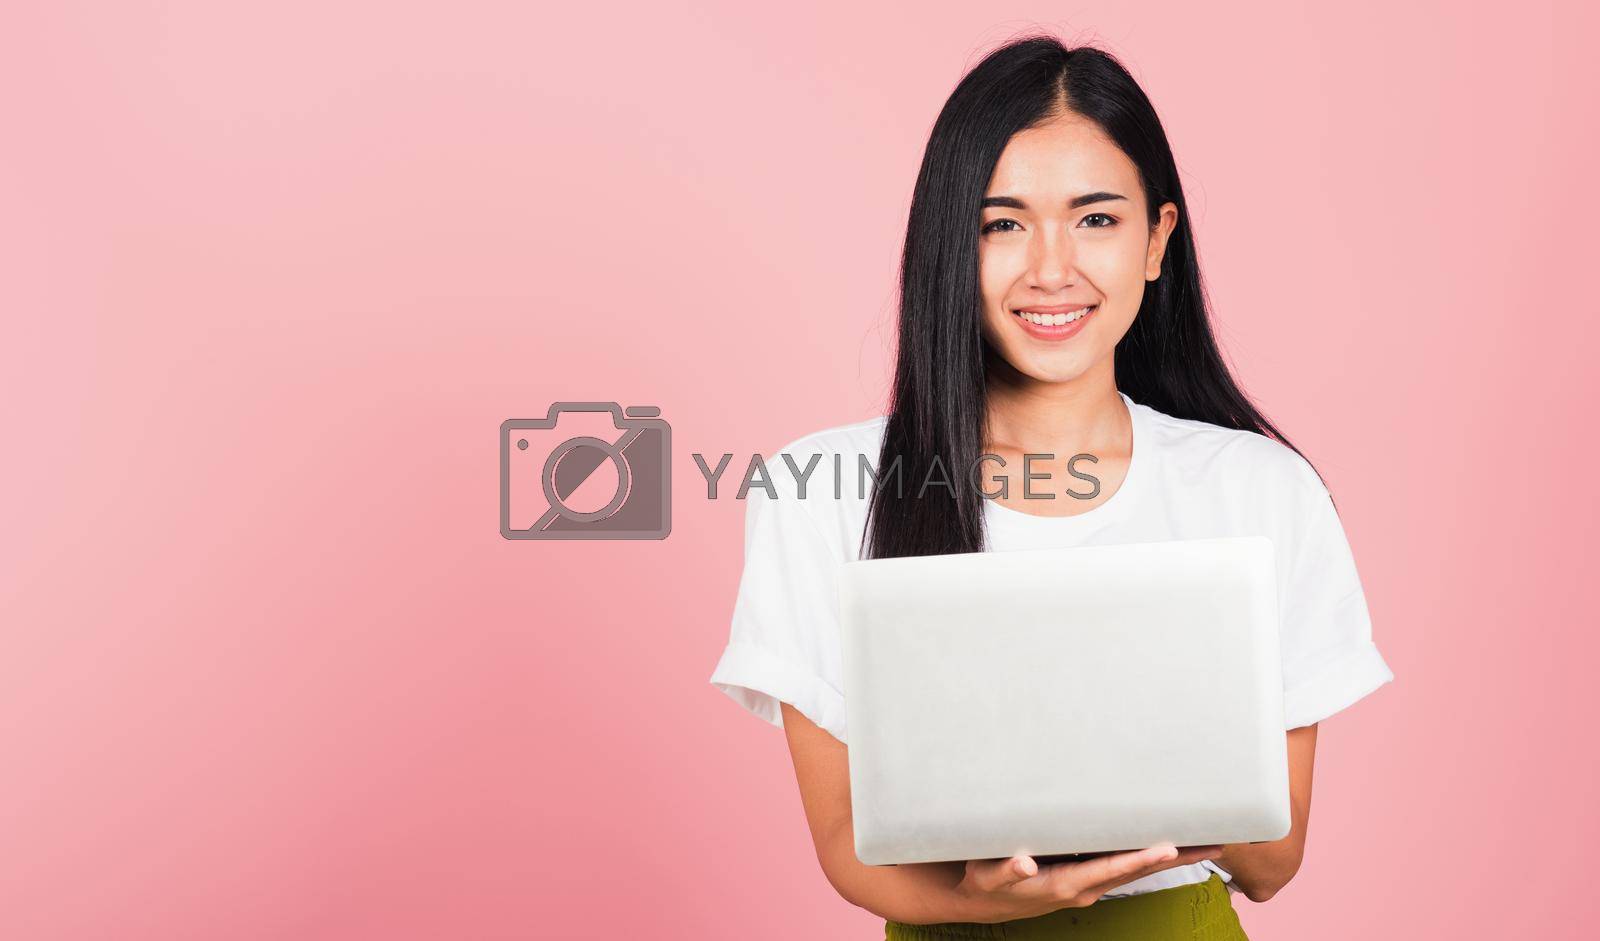 Royalty free image of woman confident smiling face holding using laptop computer by Sorapop